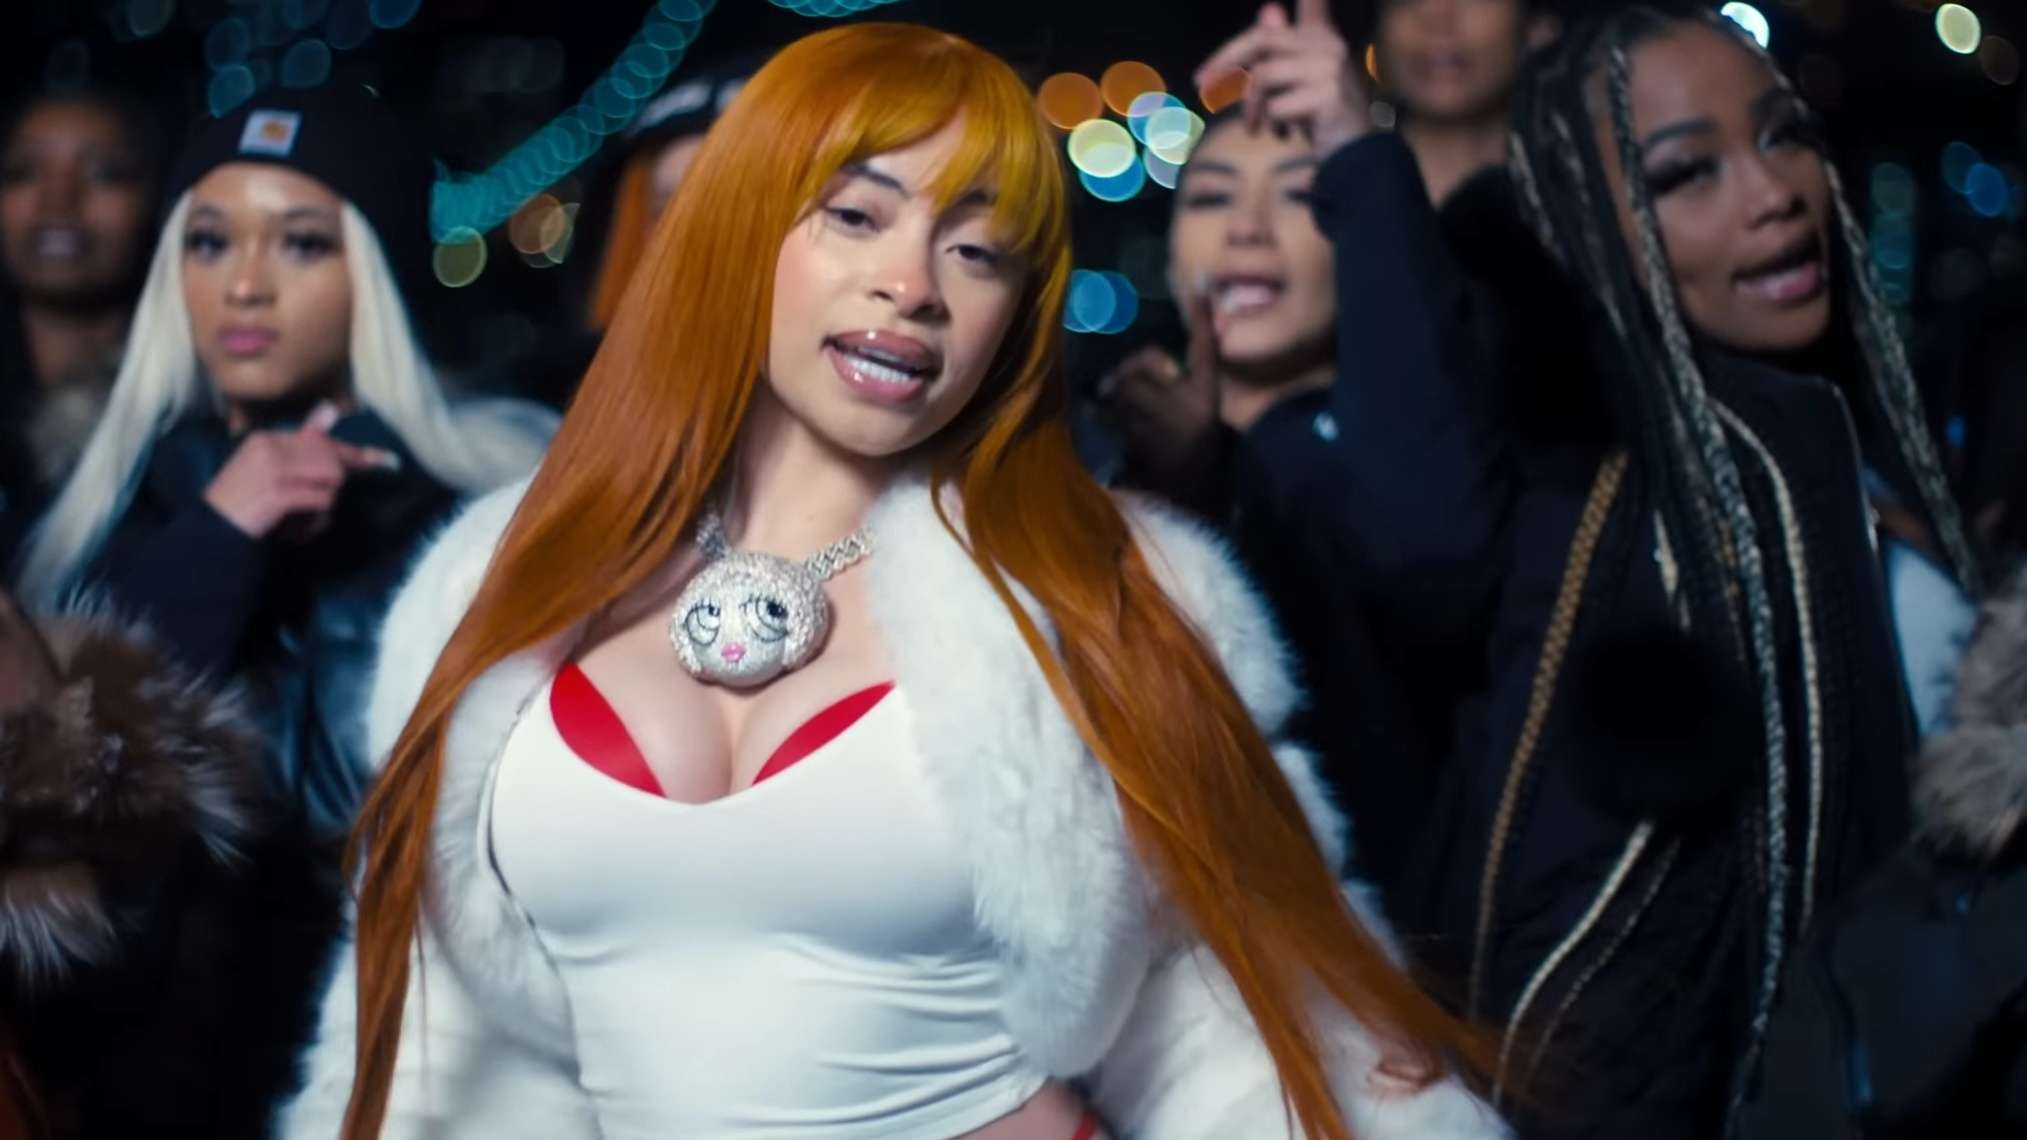 Ice Spice performing in her 'In Ha Mood' music video